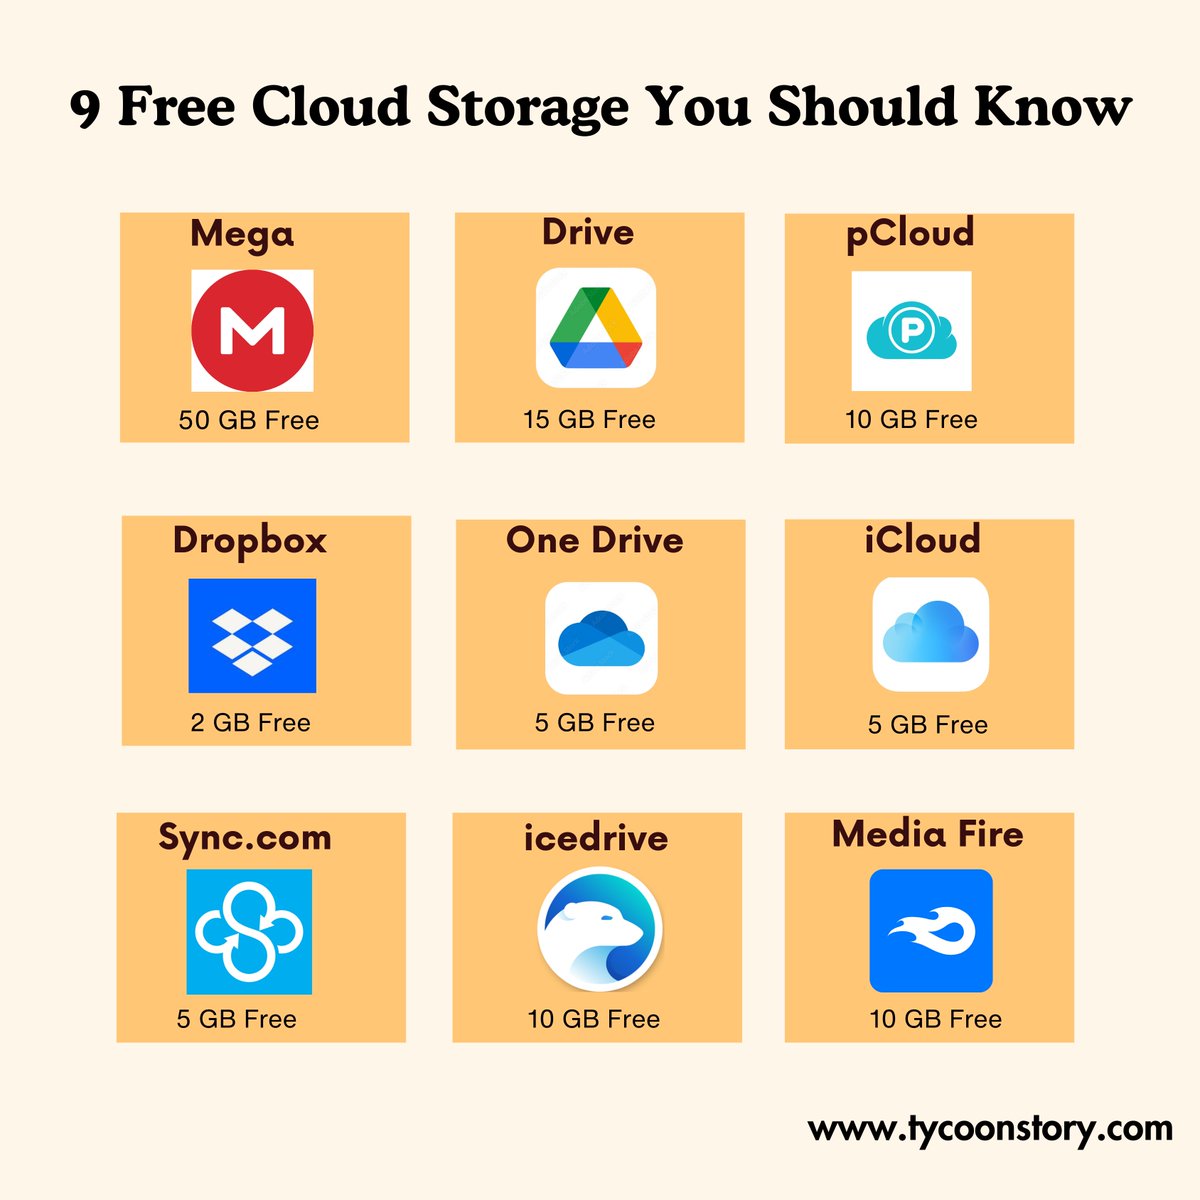 9 Free Cloud Storage Services You Should Know About

#freecloudstorage #CloudStorage #DataBackup #CloudComputing #filesharing #onlinestorage #TechResources #dataaccessibility #cloudservices #storagesolutions #cloudbackup #Requirements #Dropbox #Mediafire